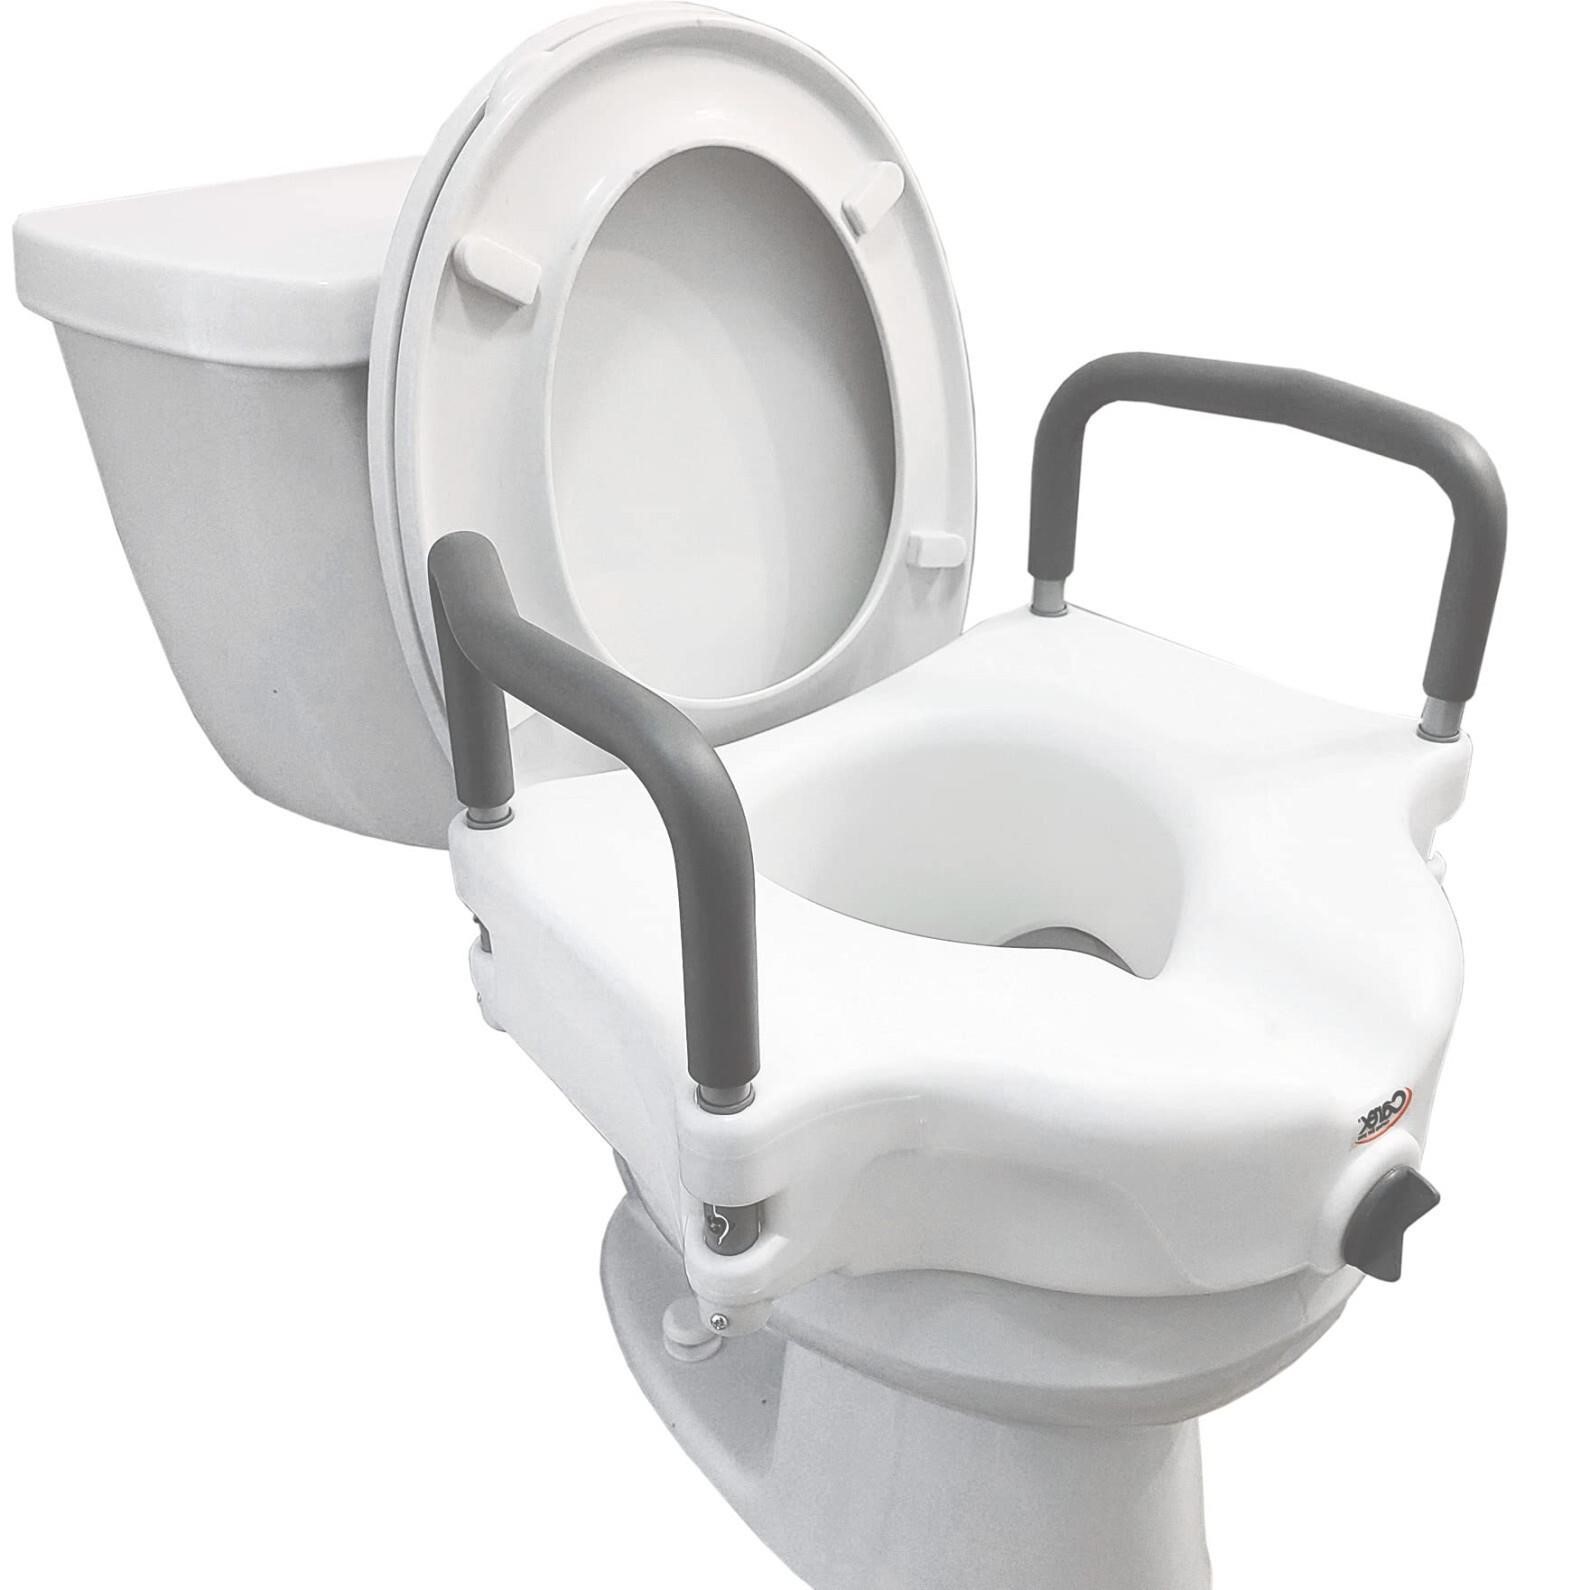 Carex 4.5 Inch Raised Toilet Seat with Arms - For